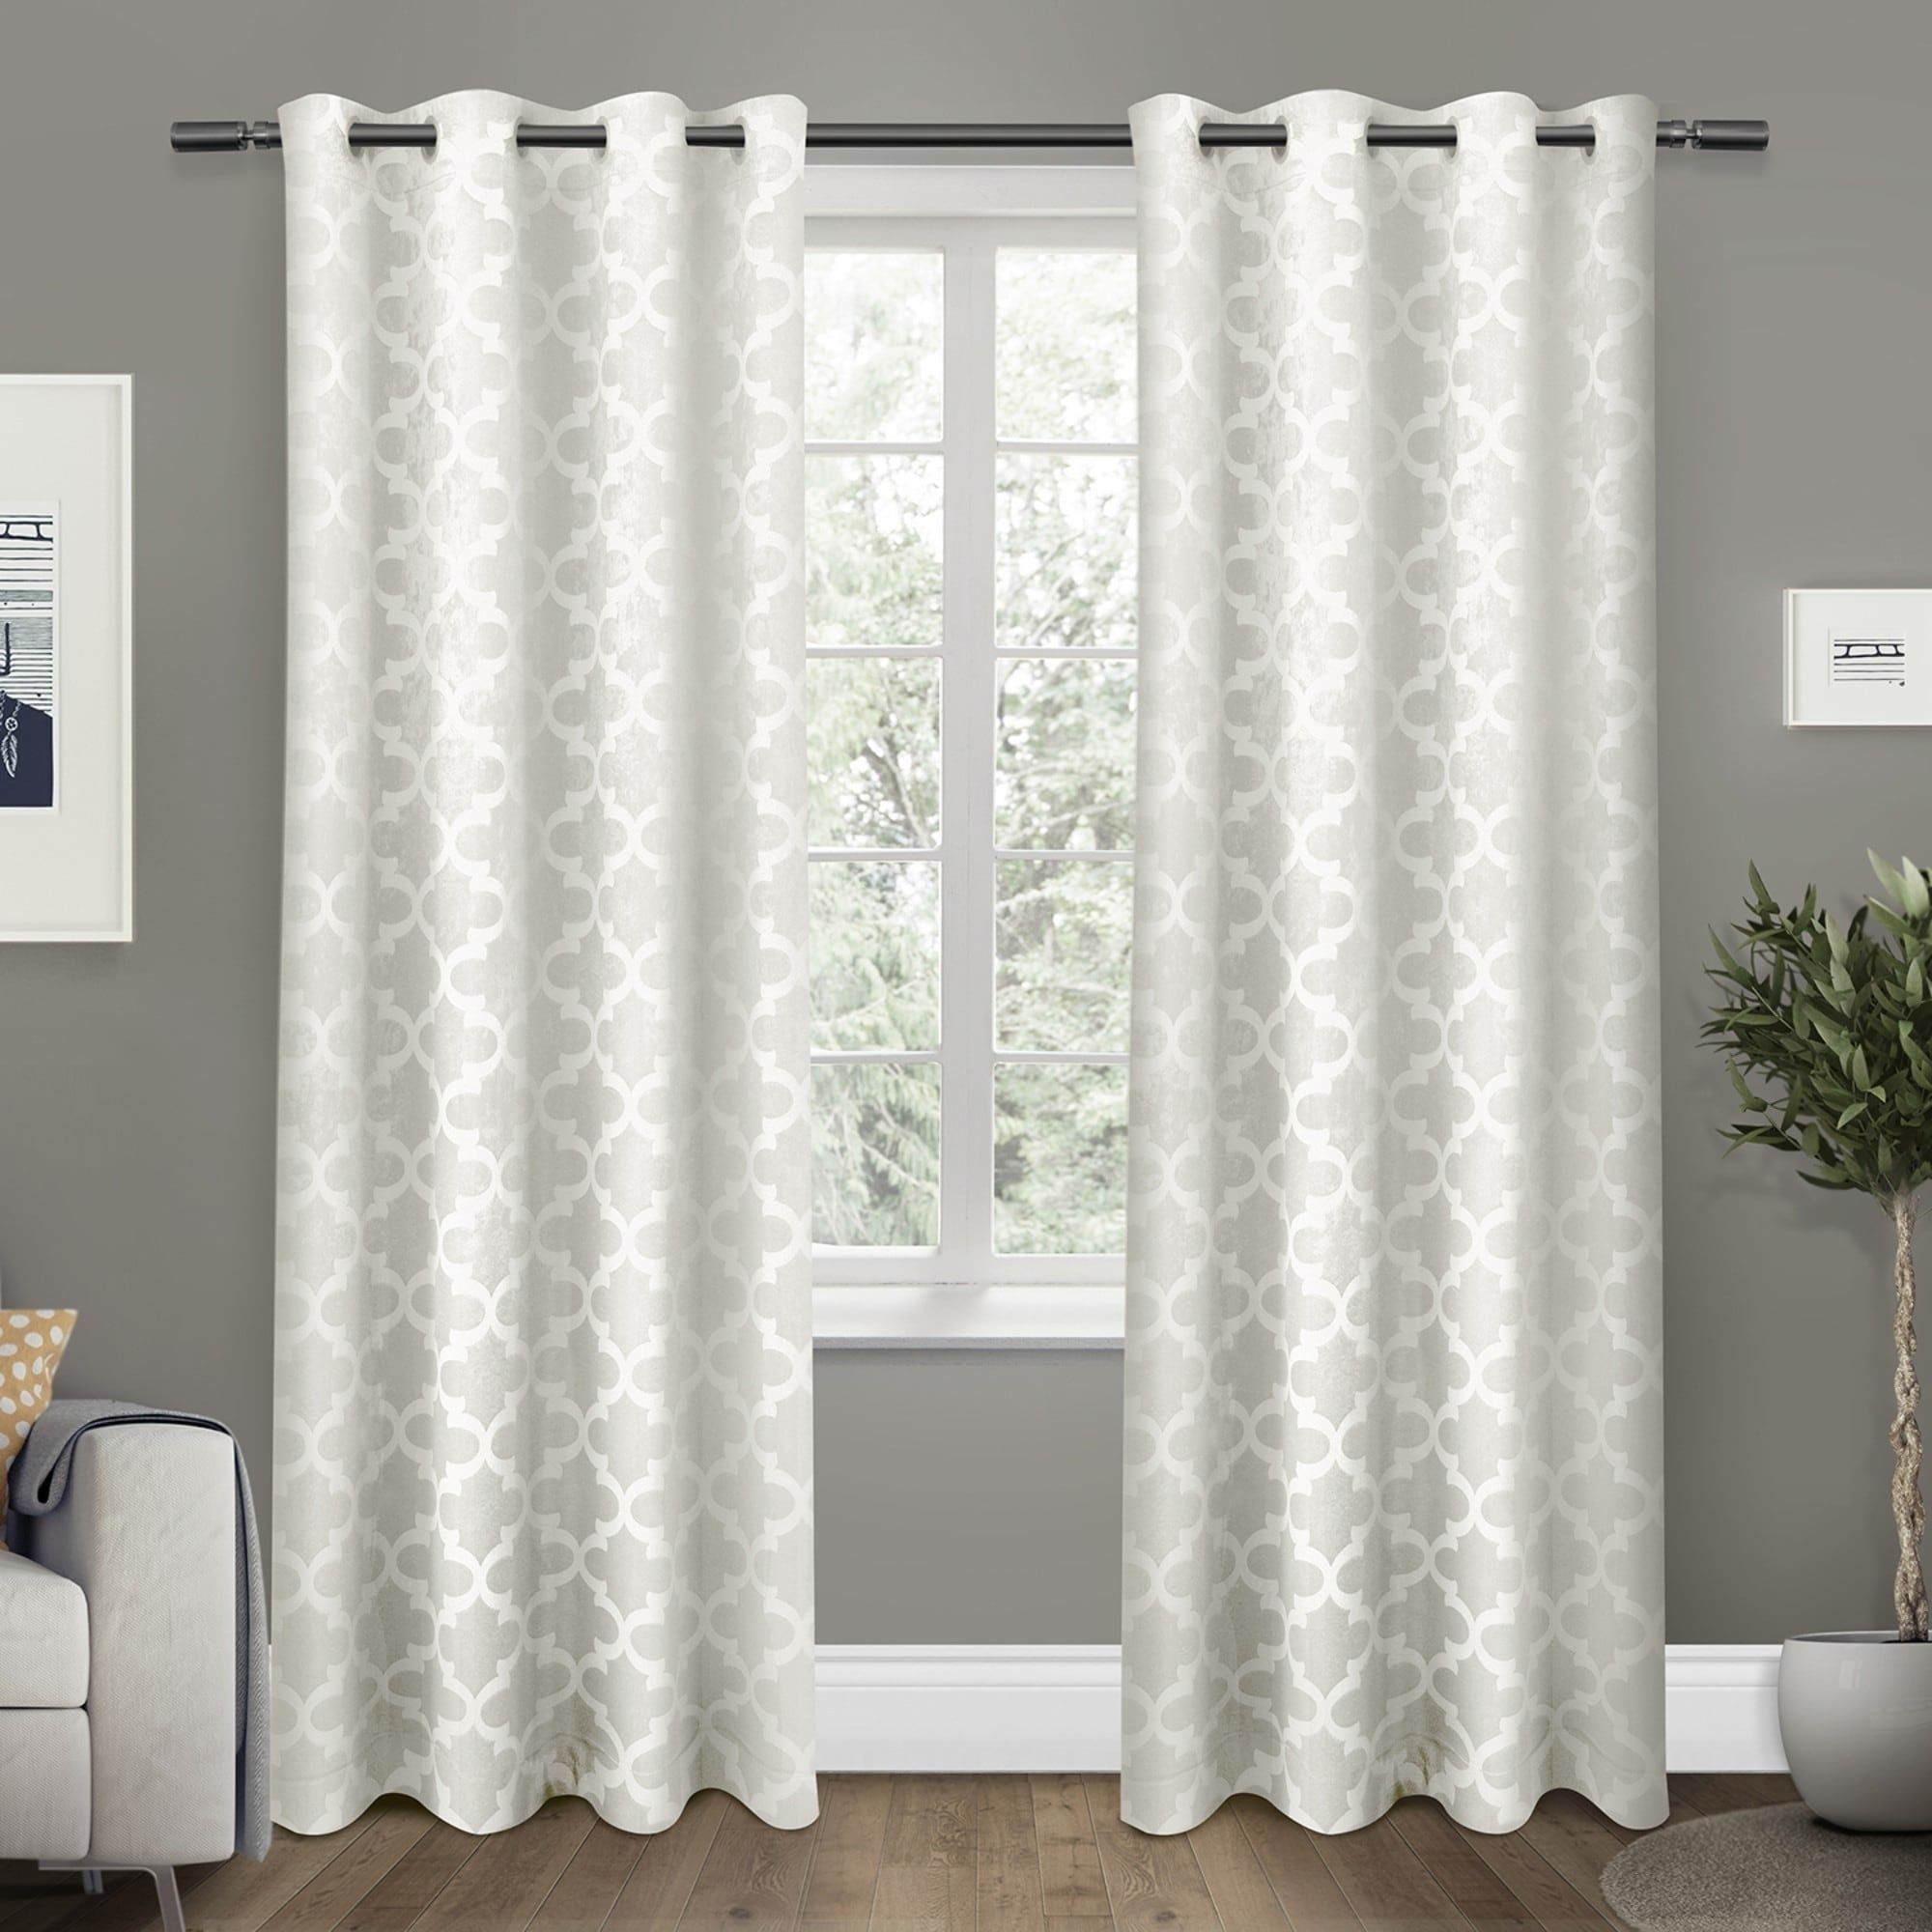 Ati Home Woven Blackout Curtain Panel Pair With Grommet Top For Woven Blackout Curtain Panel Pairs With Grommet Top (Photo 6 of 30)